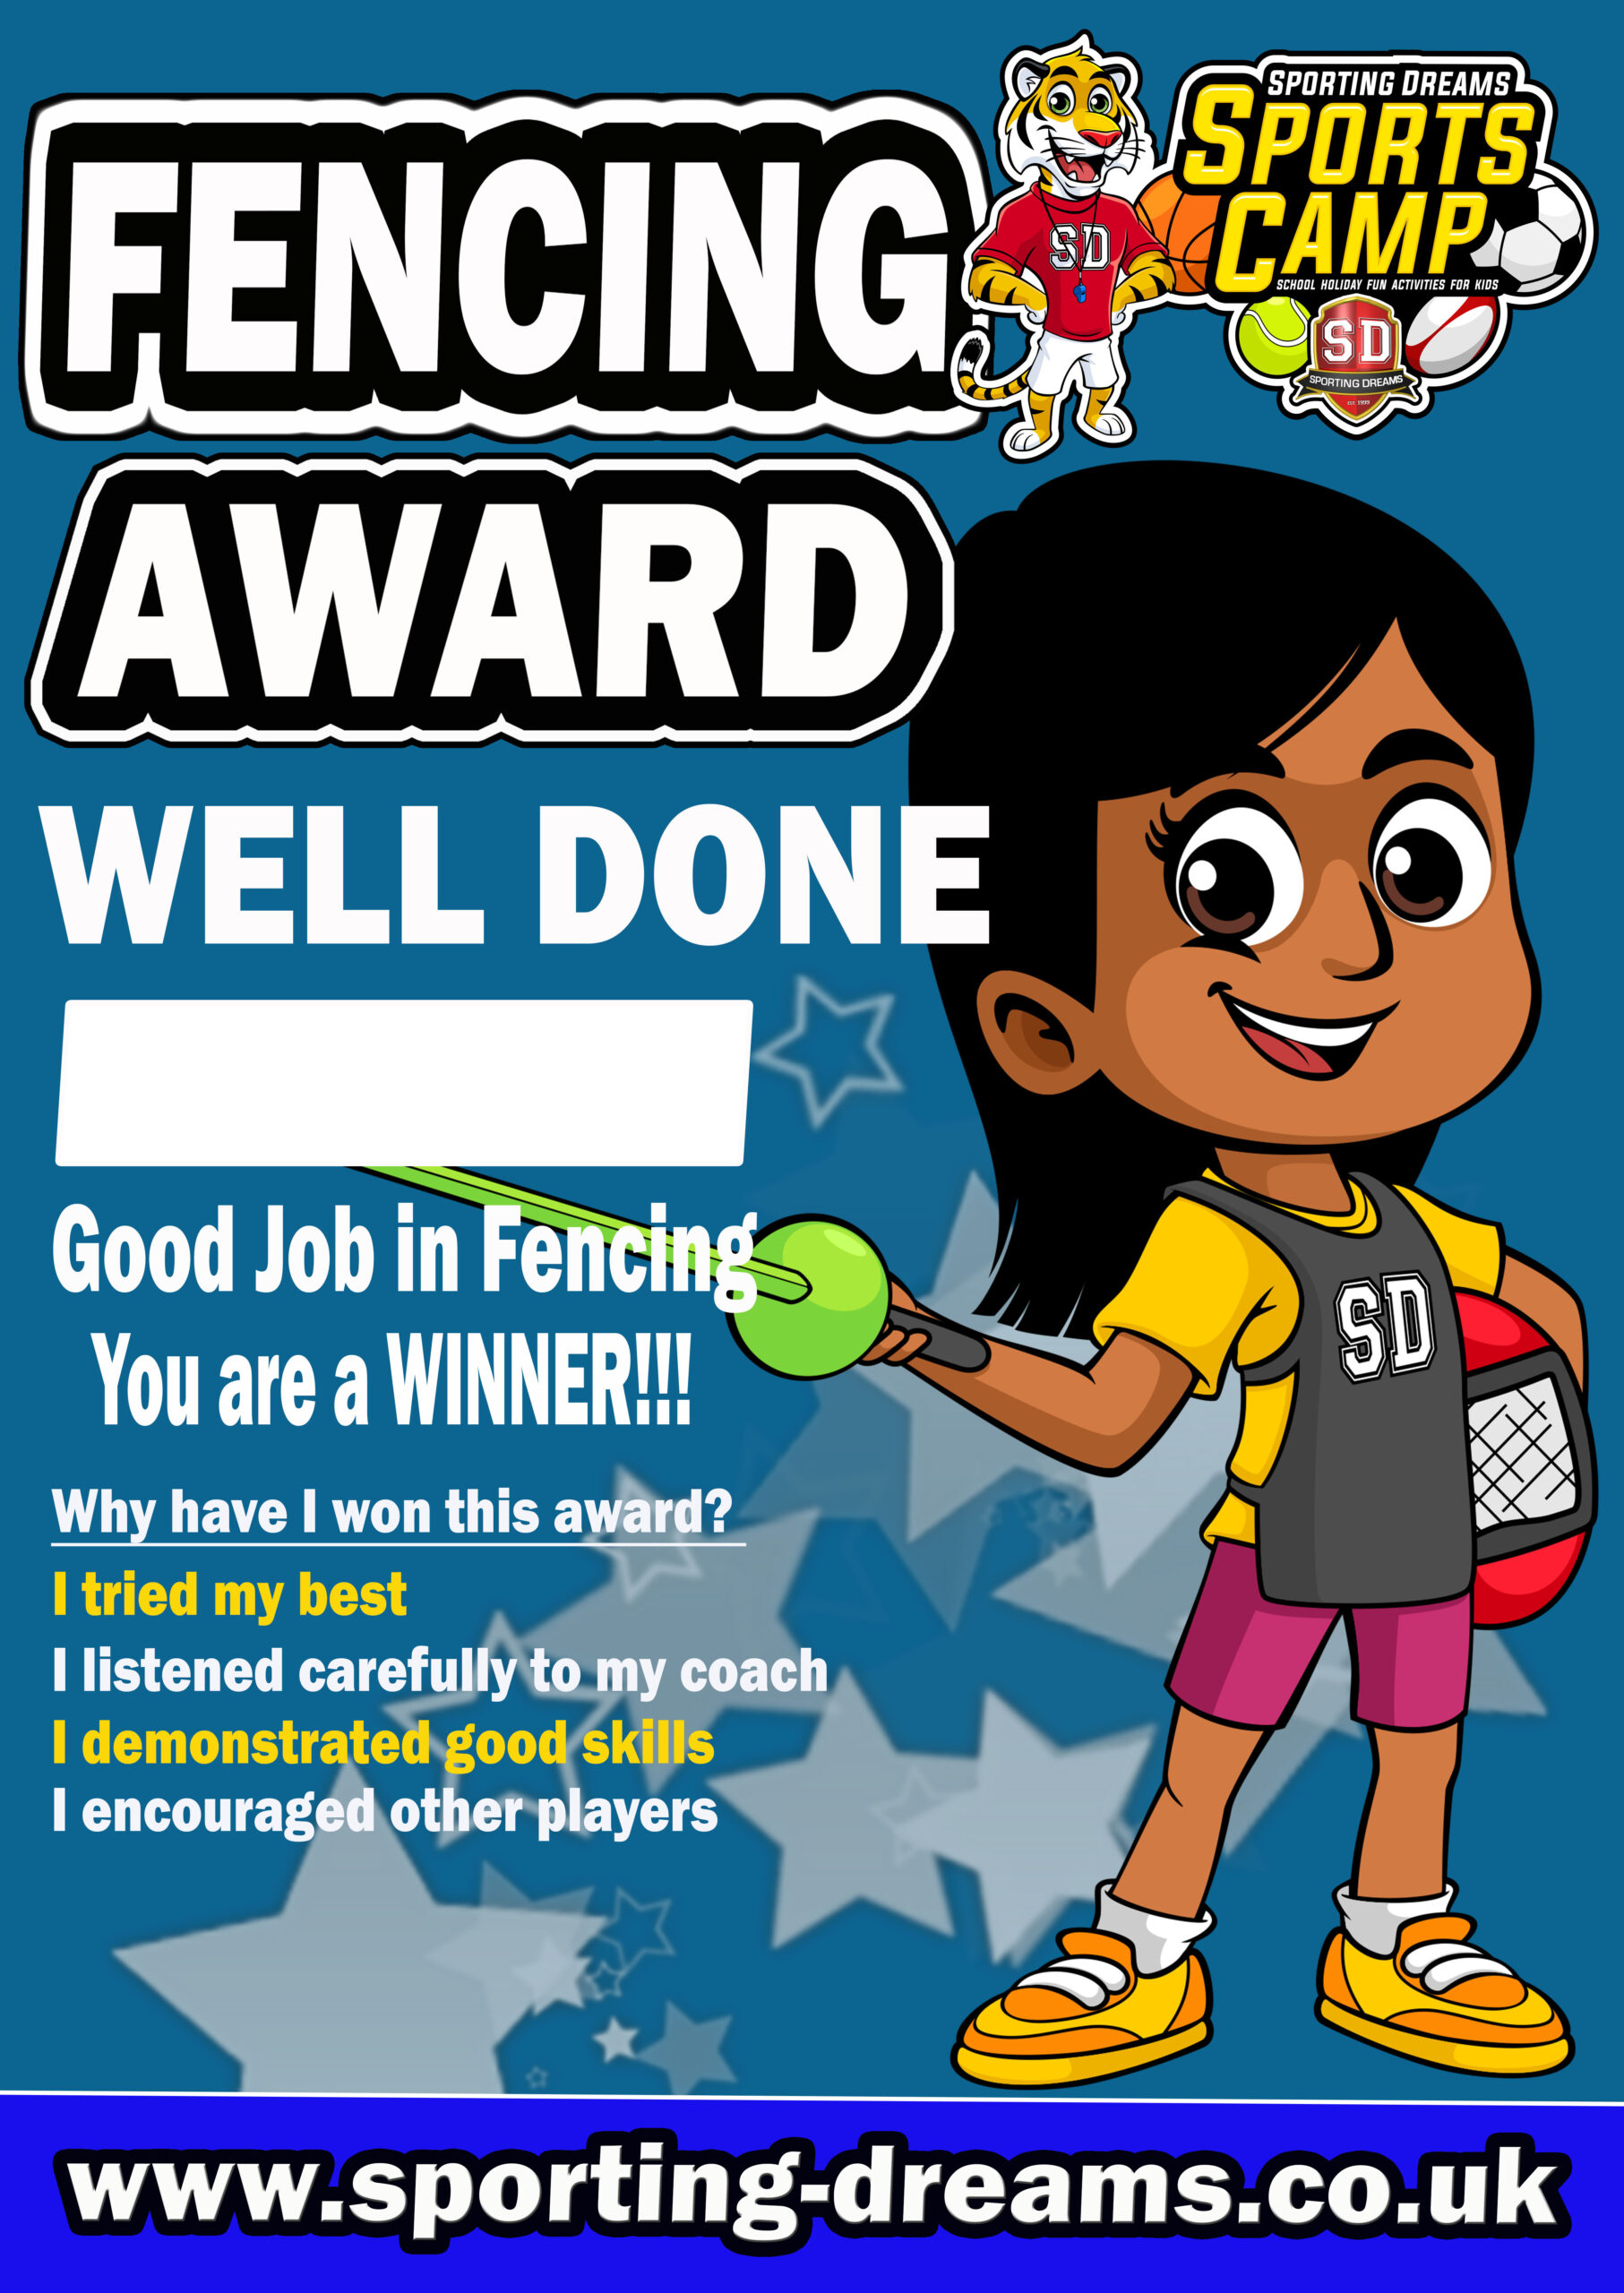 Sporting Dreams School Holiday Sports Camps. Fencing Award